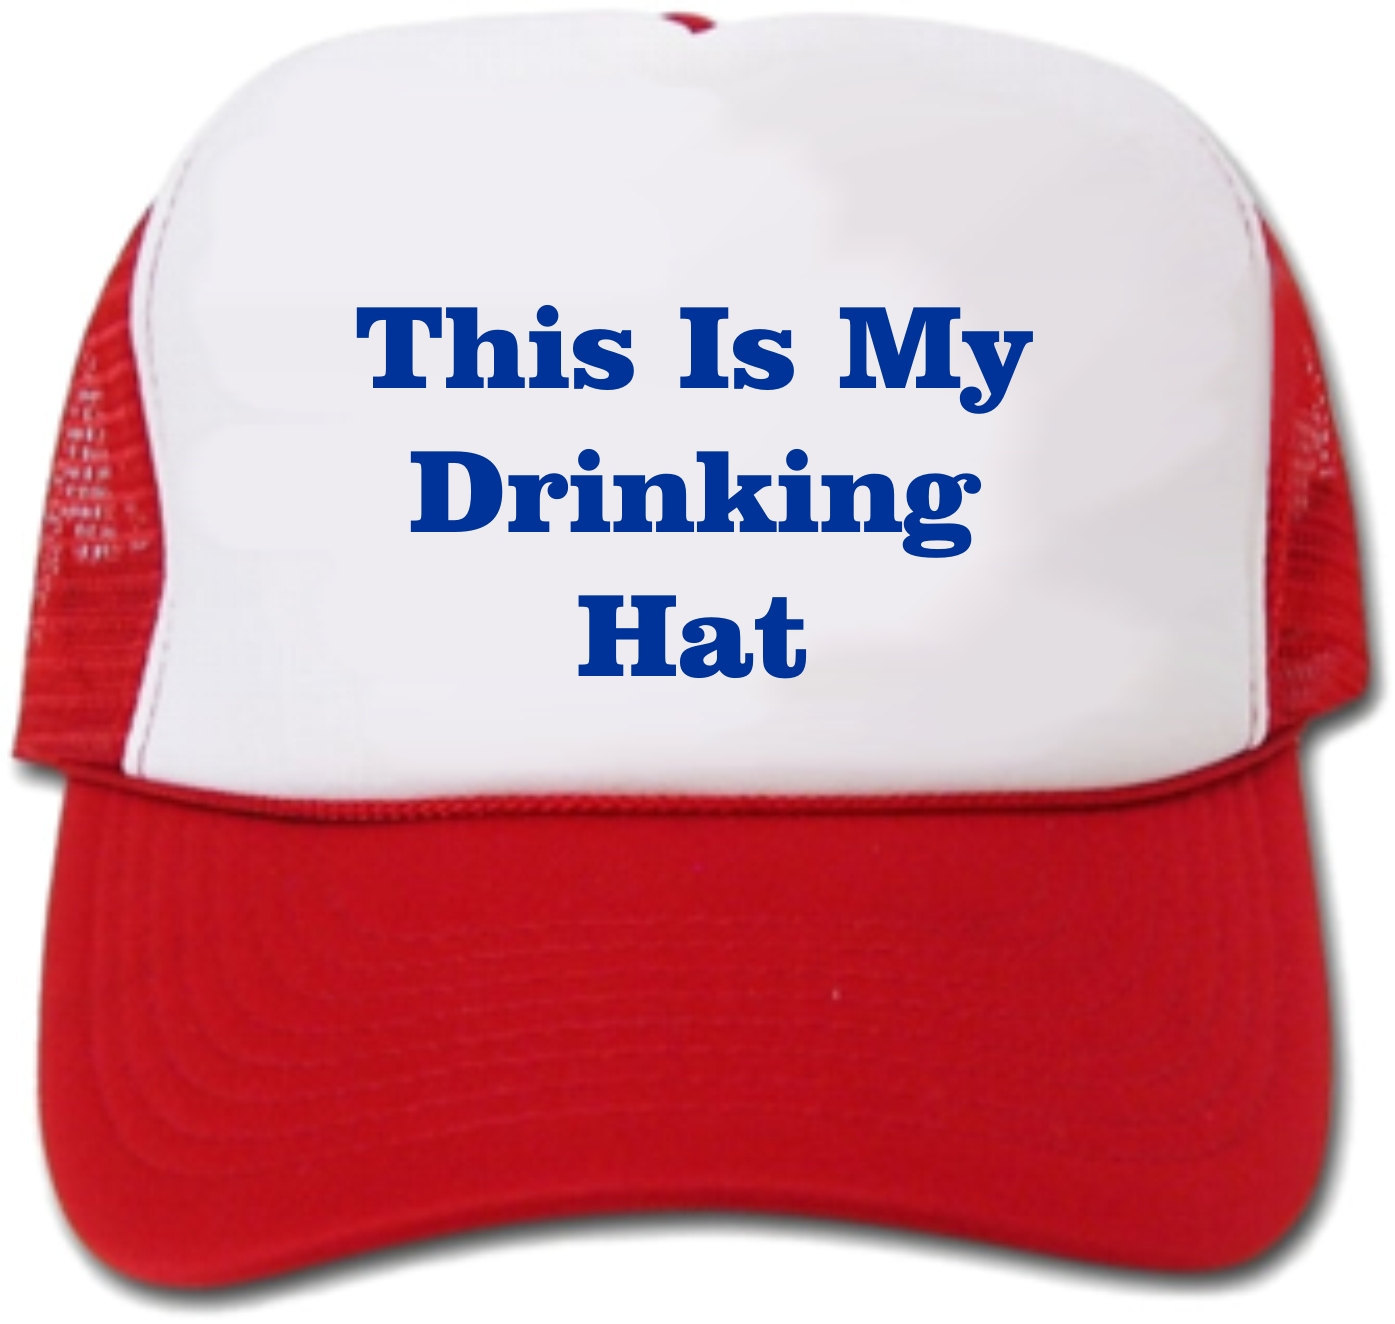 This Is My Drinking Hat/Cap